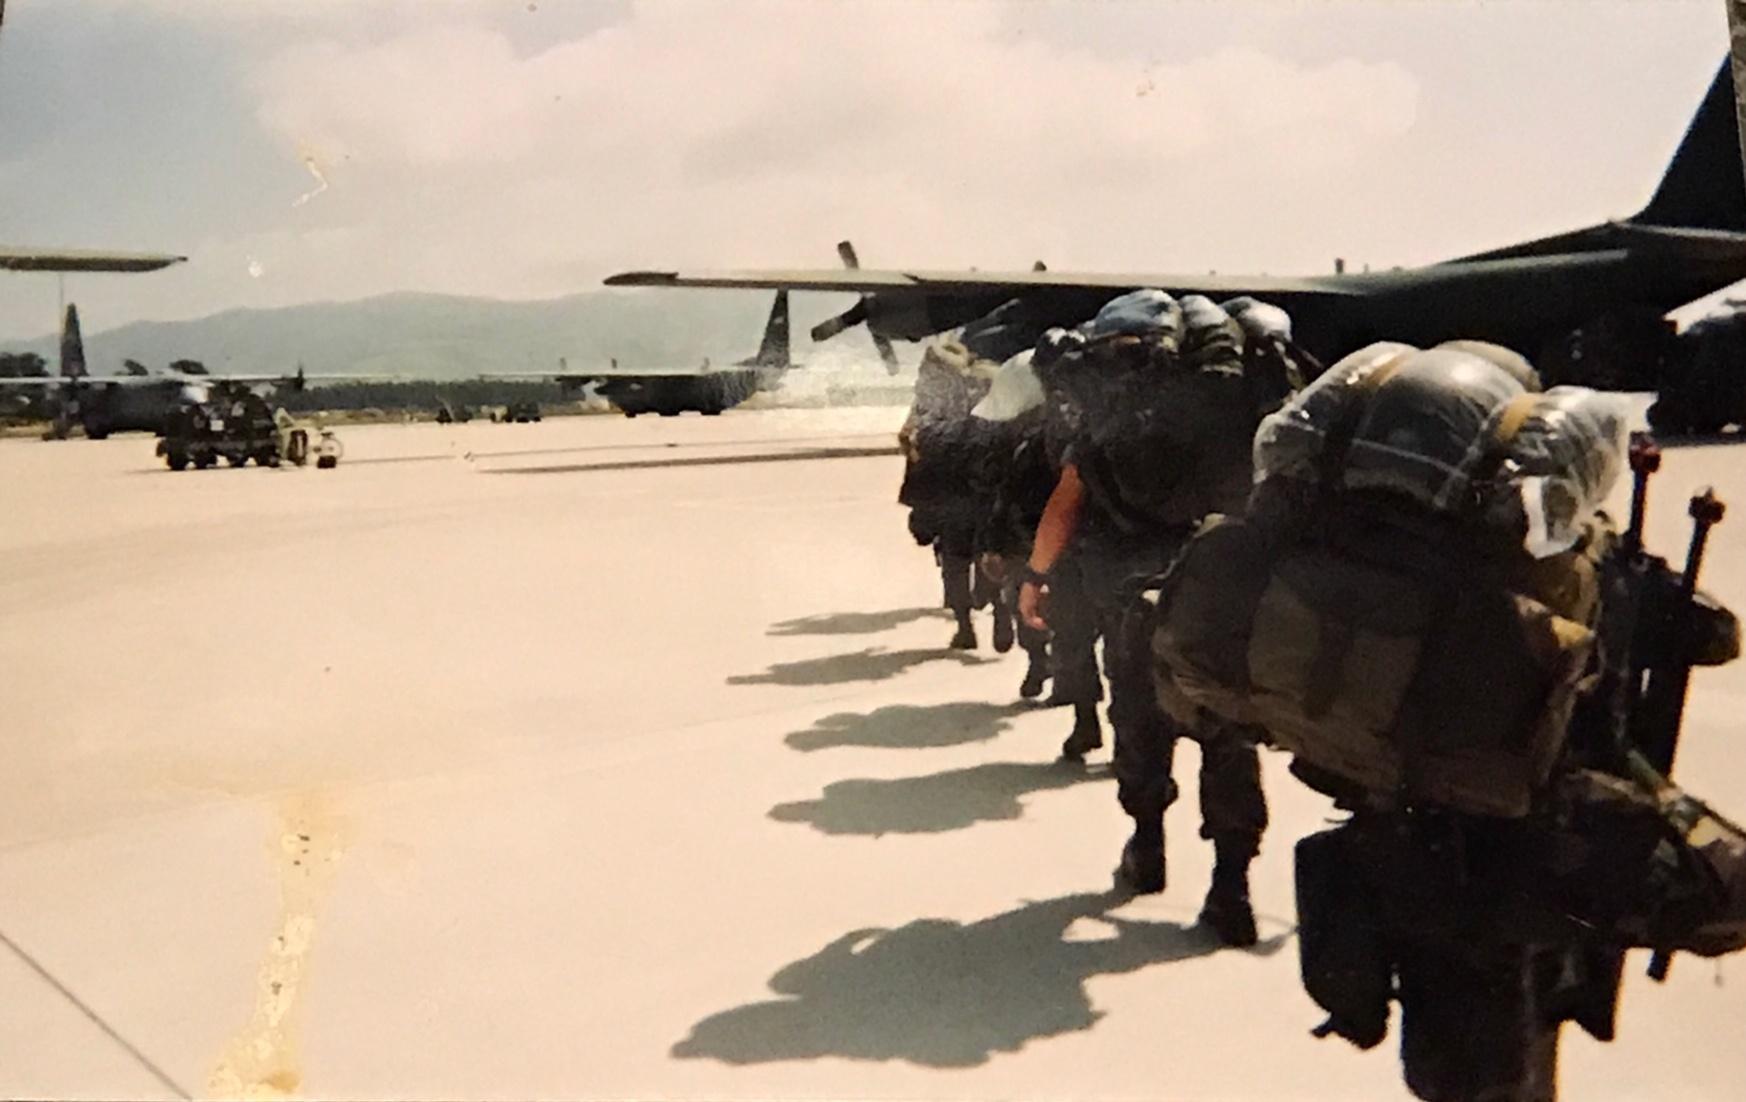 Air force soldiers on the tarmac walking towards a large military plane